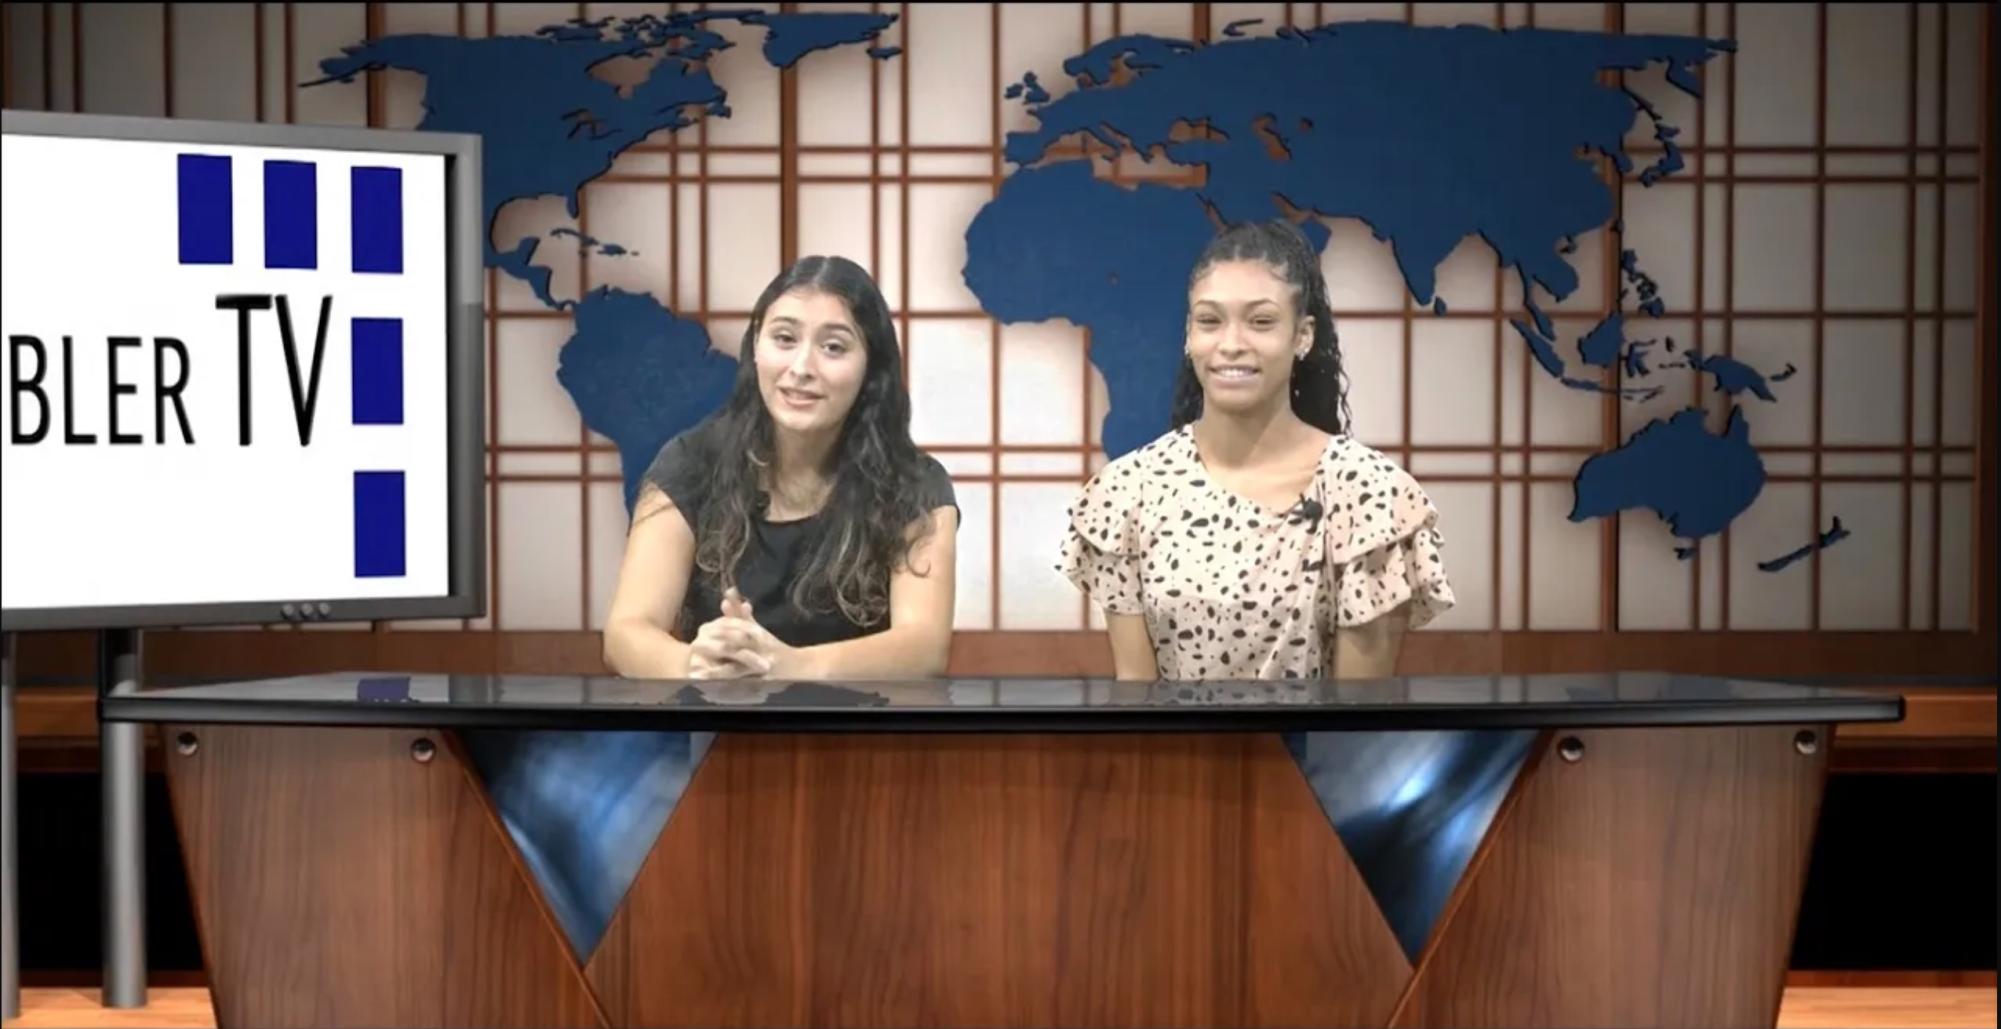 First Newscast of the fall season with Maliah LaCour and Ariadna Garza